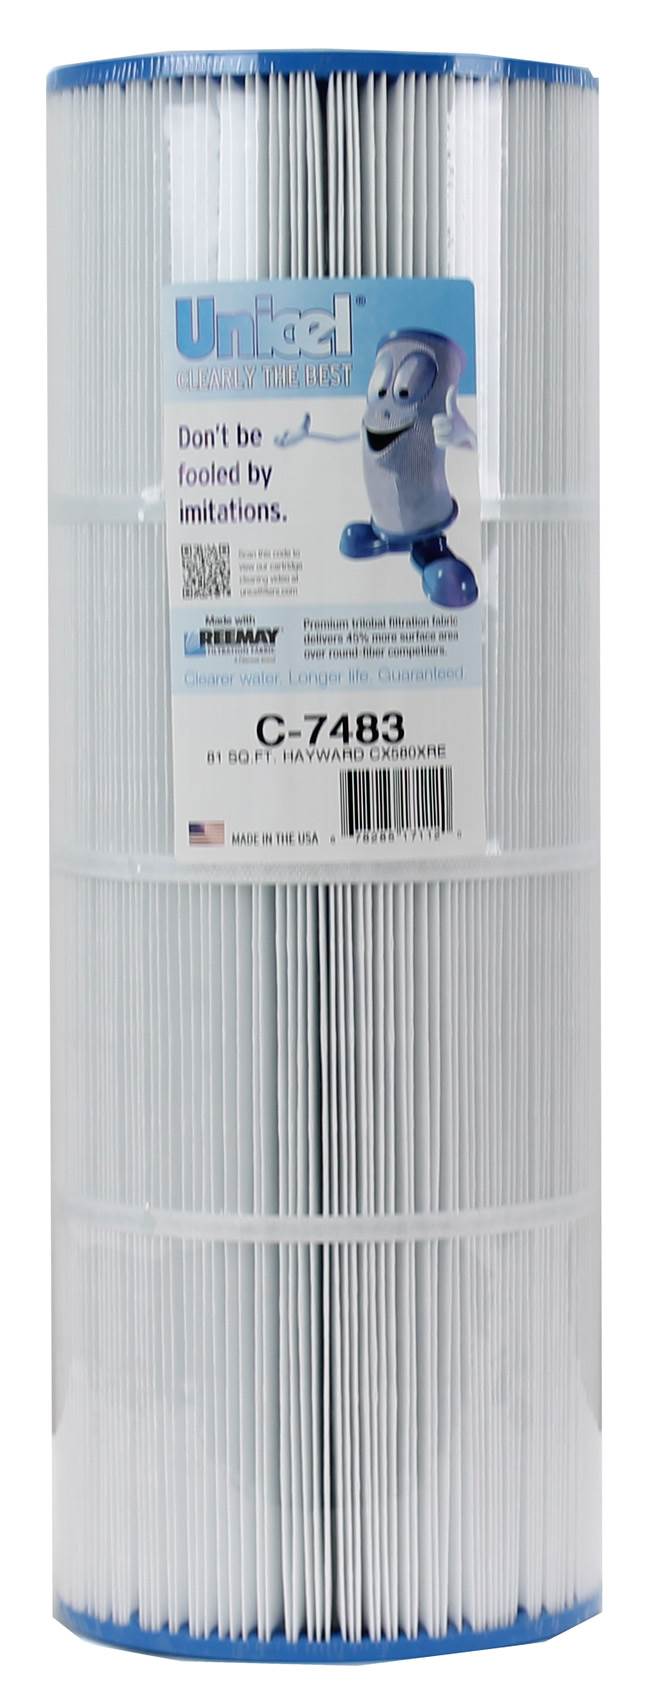 Unicel C-7483 Spa Replacement Filter Cartridges 81 Sq Ft Hayward Swim Clear 2PK - VMInnovations